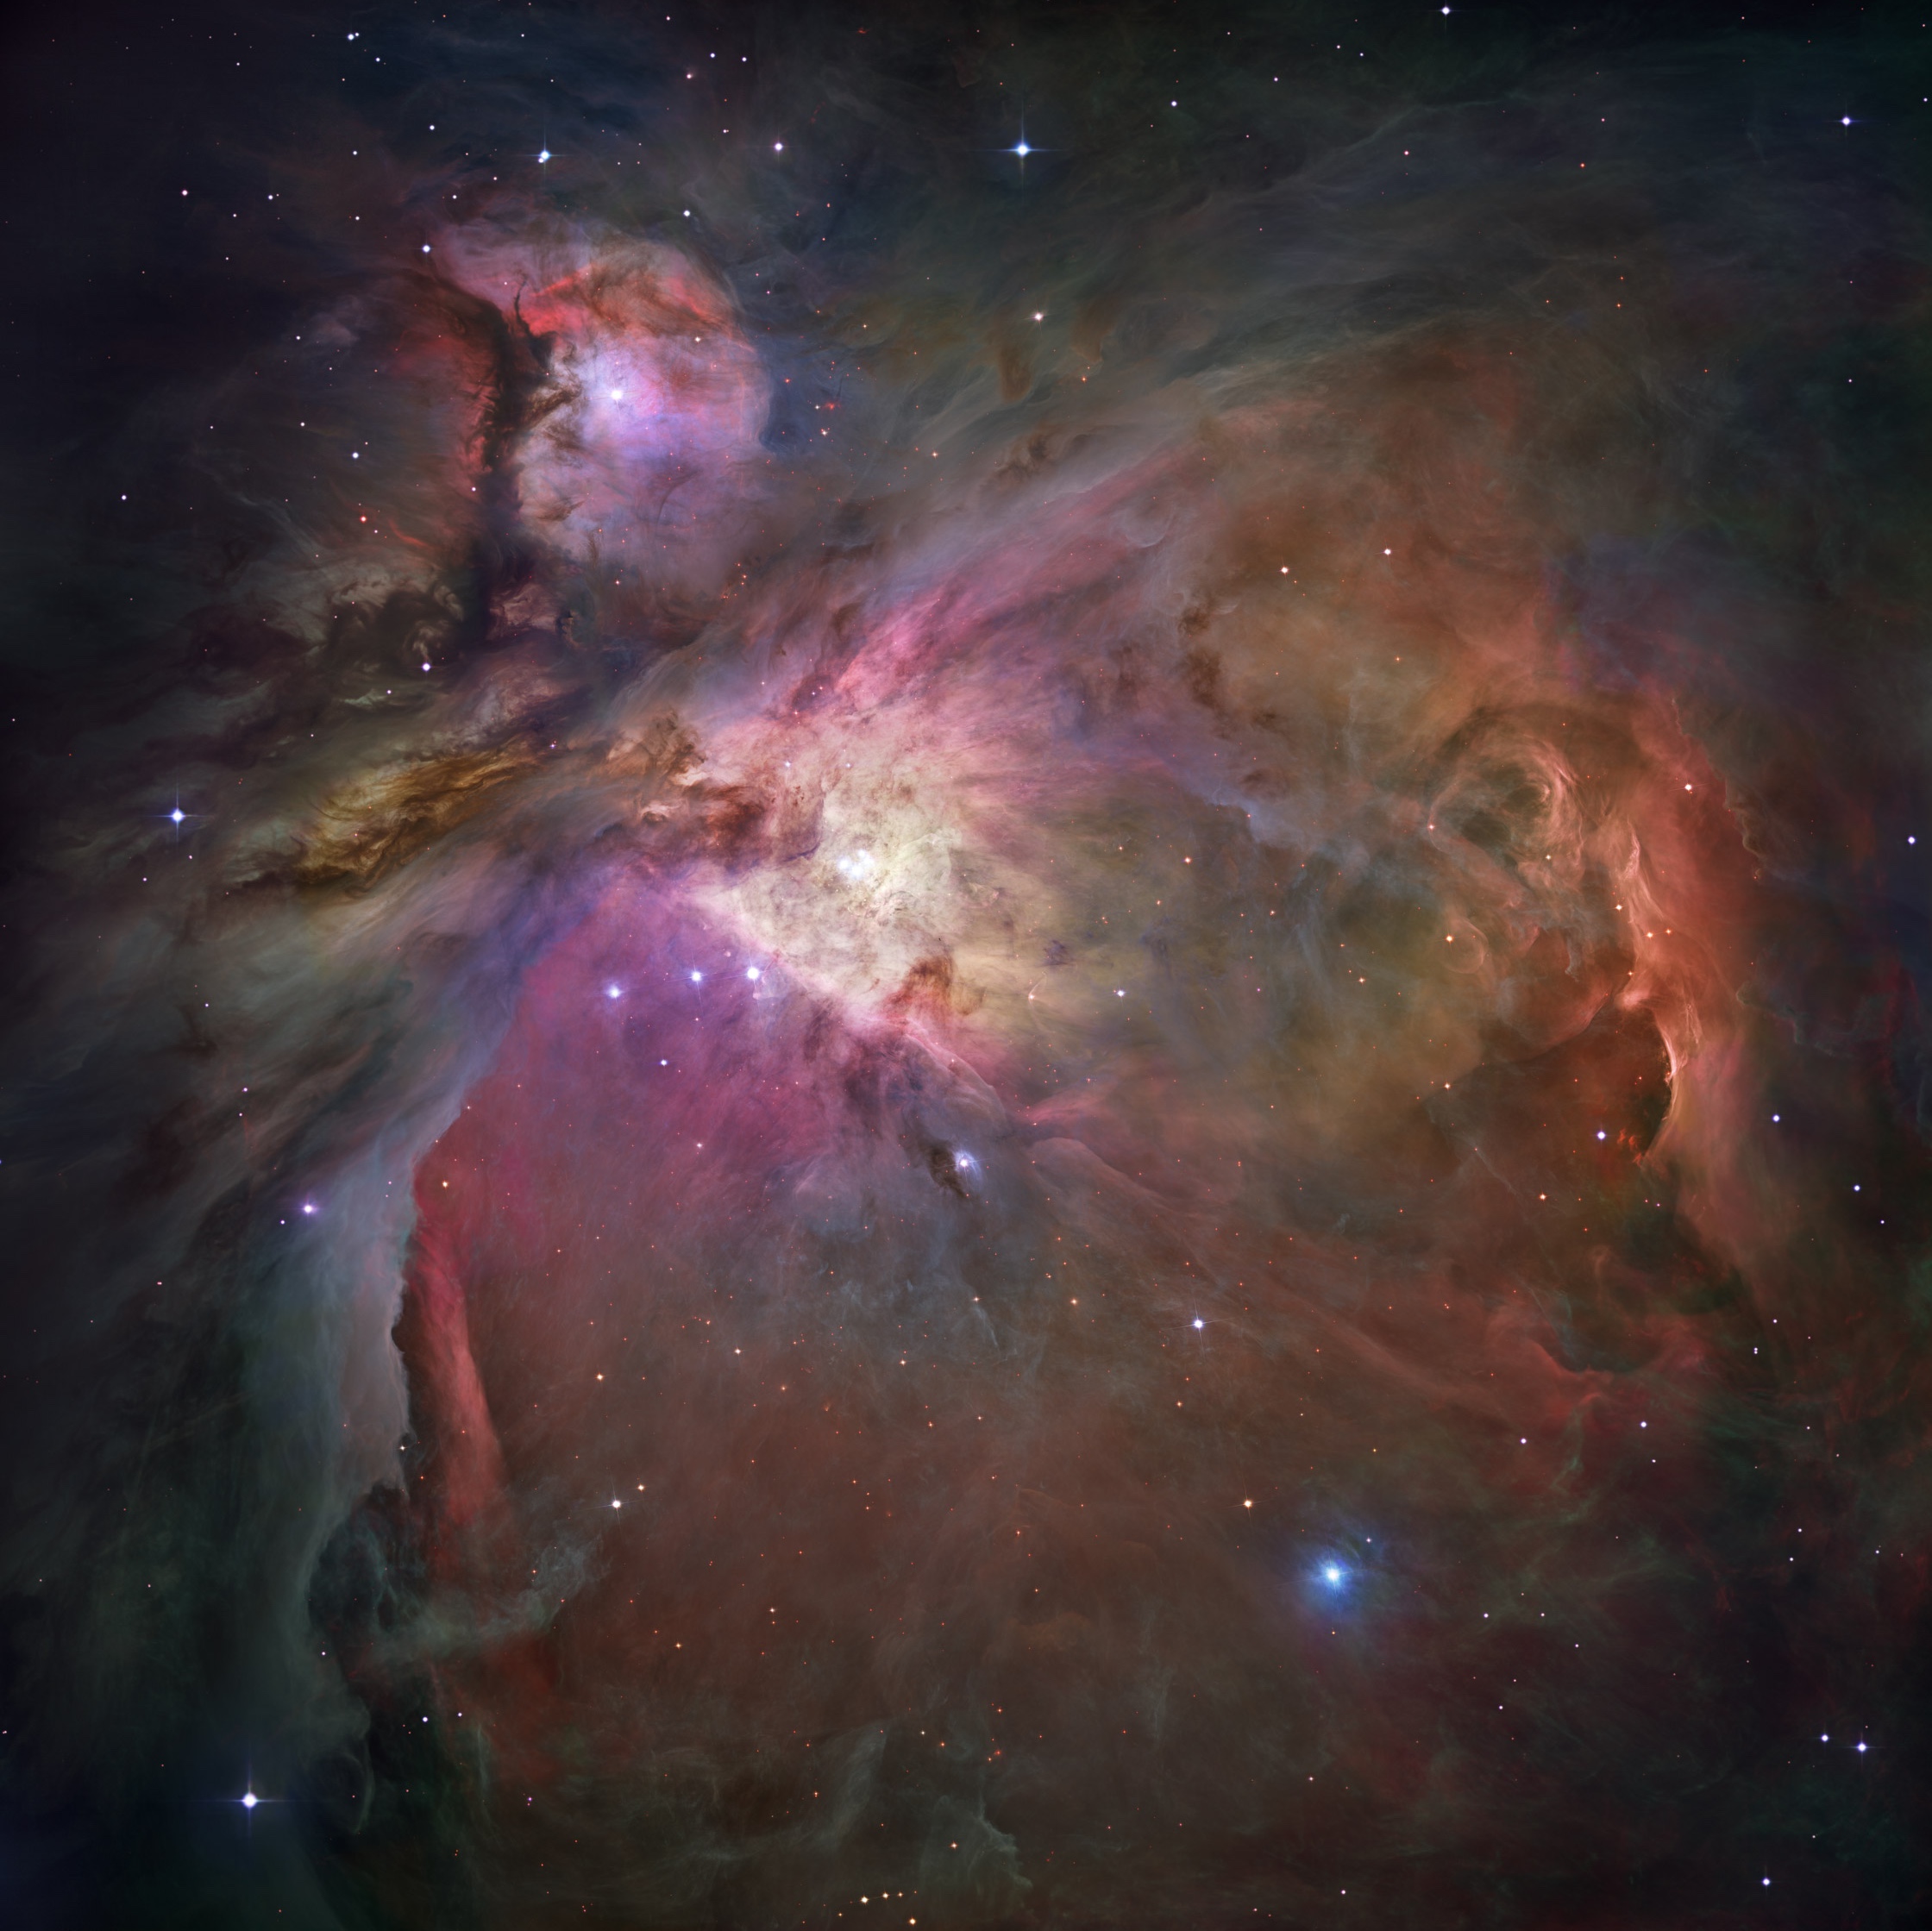 Orion Nebula picture by the Hubble Space Telescope